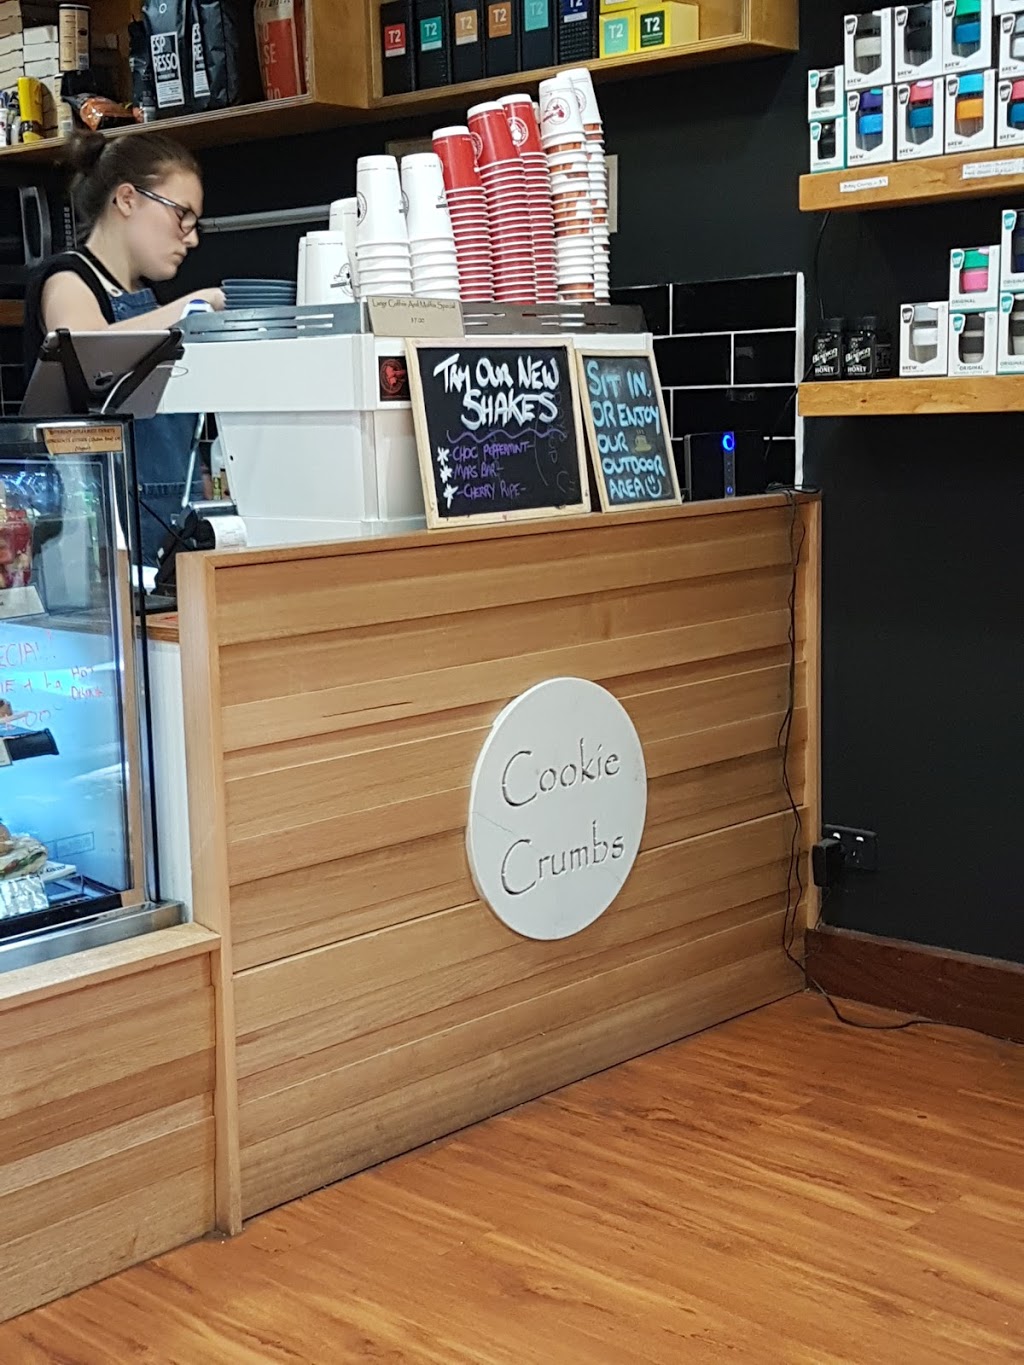 Cookie Crumbs | cafe | 5/50 Mostyn St, Castlemaine VIC 3450, Australia